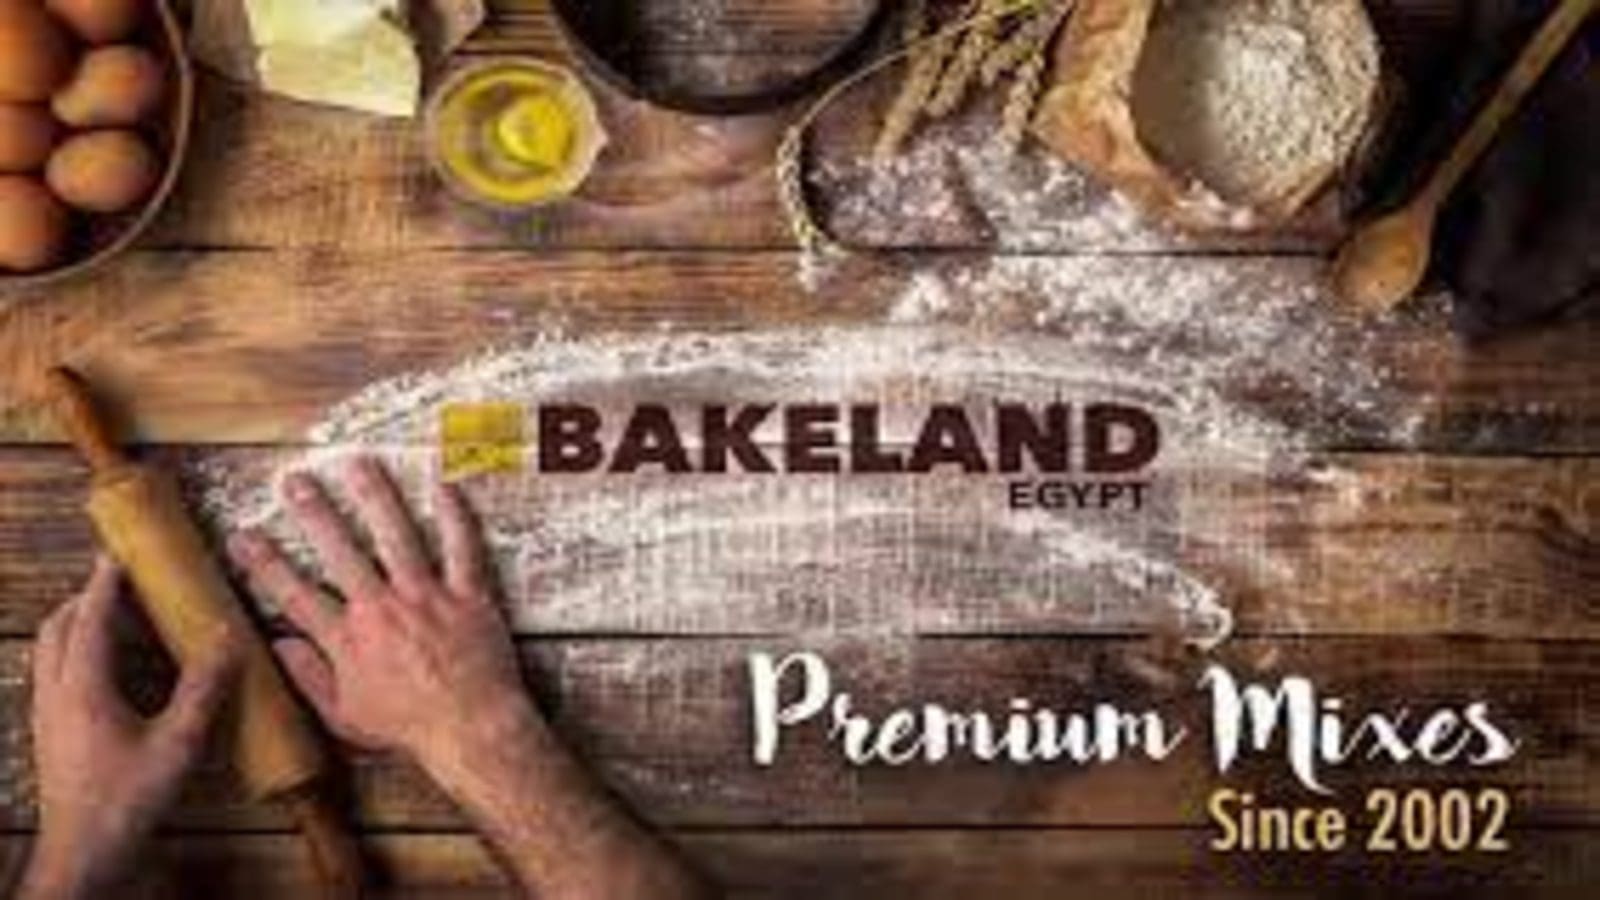 Bake Land Egypt to move bakery operations into US$23M manufacturing facility